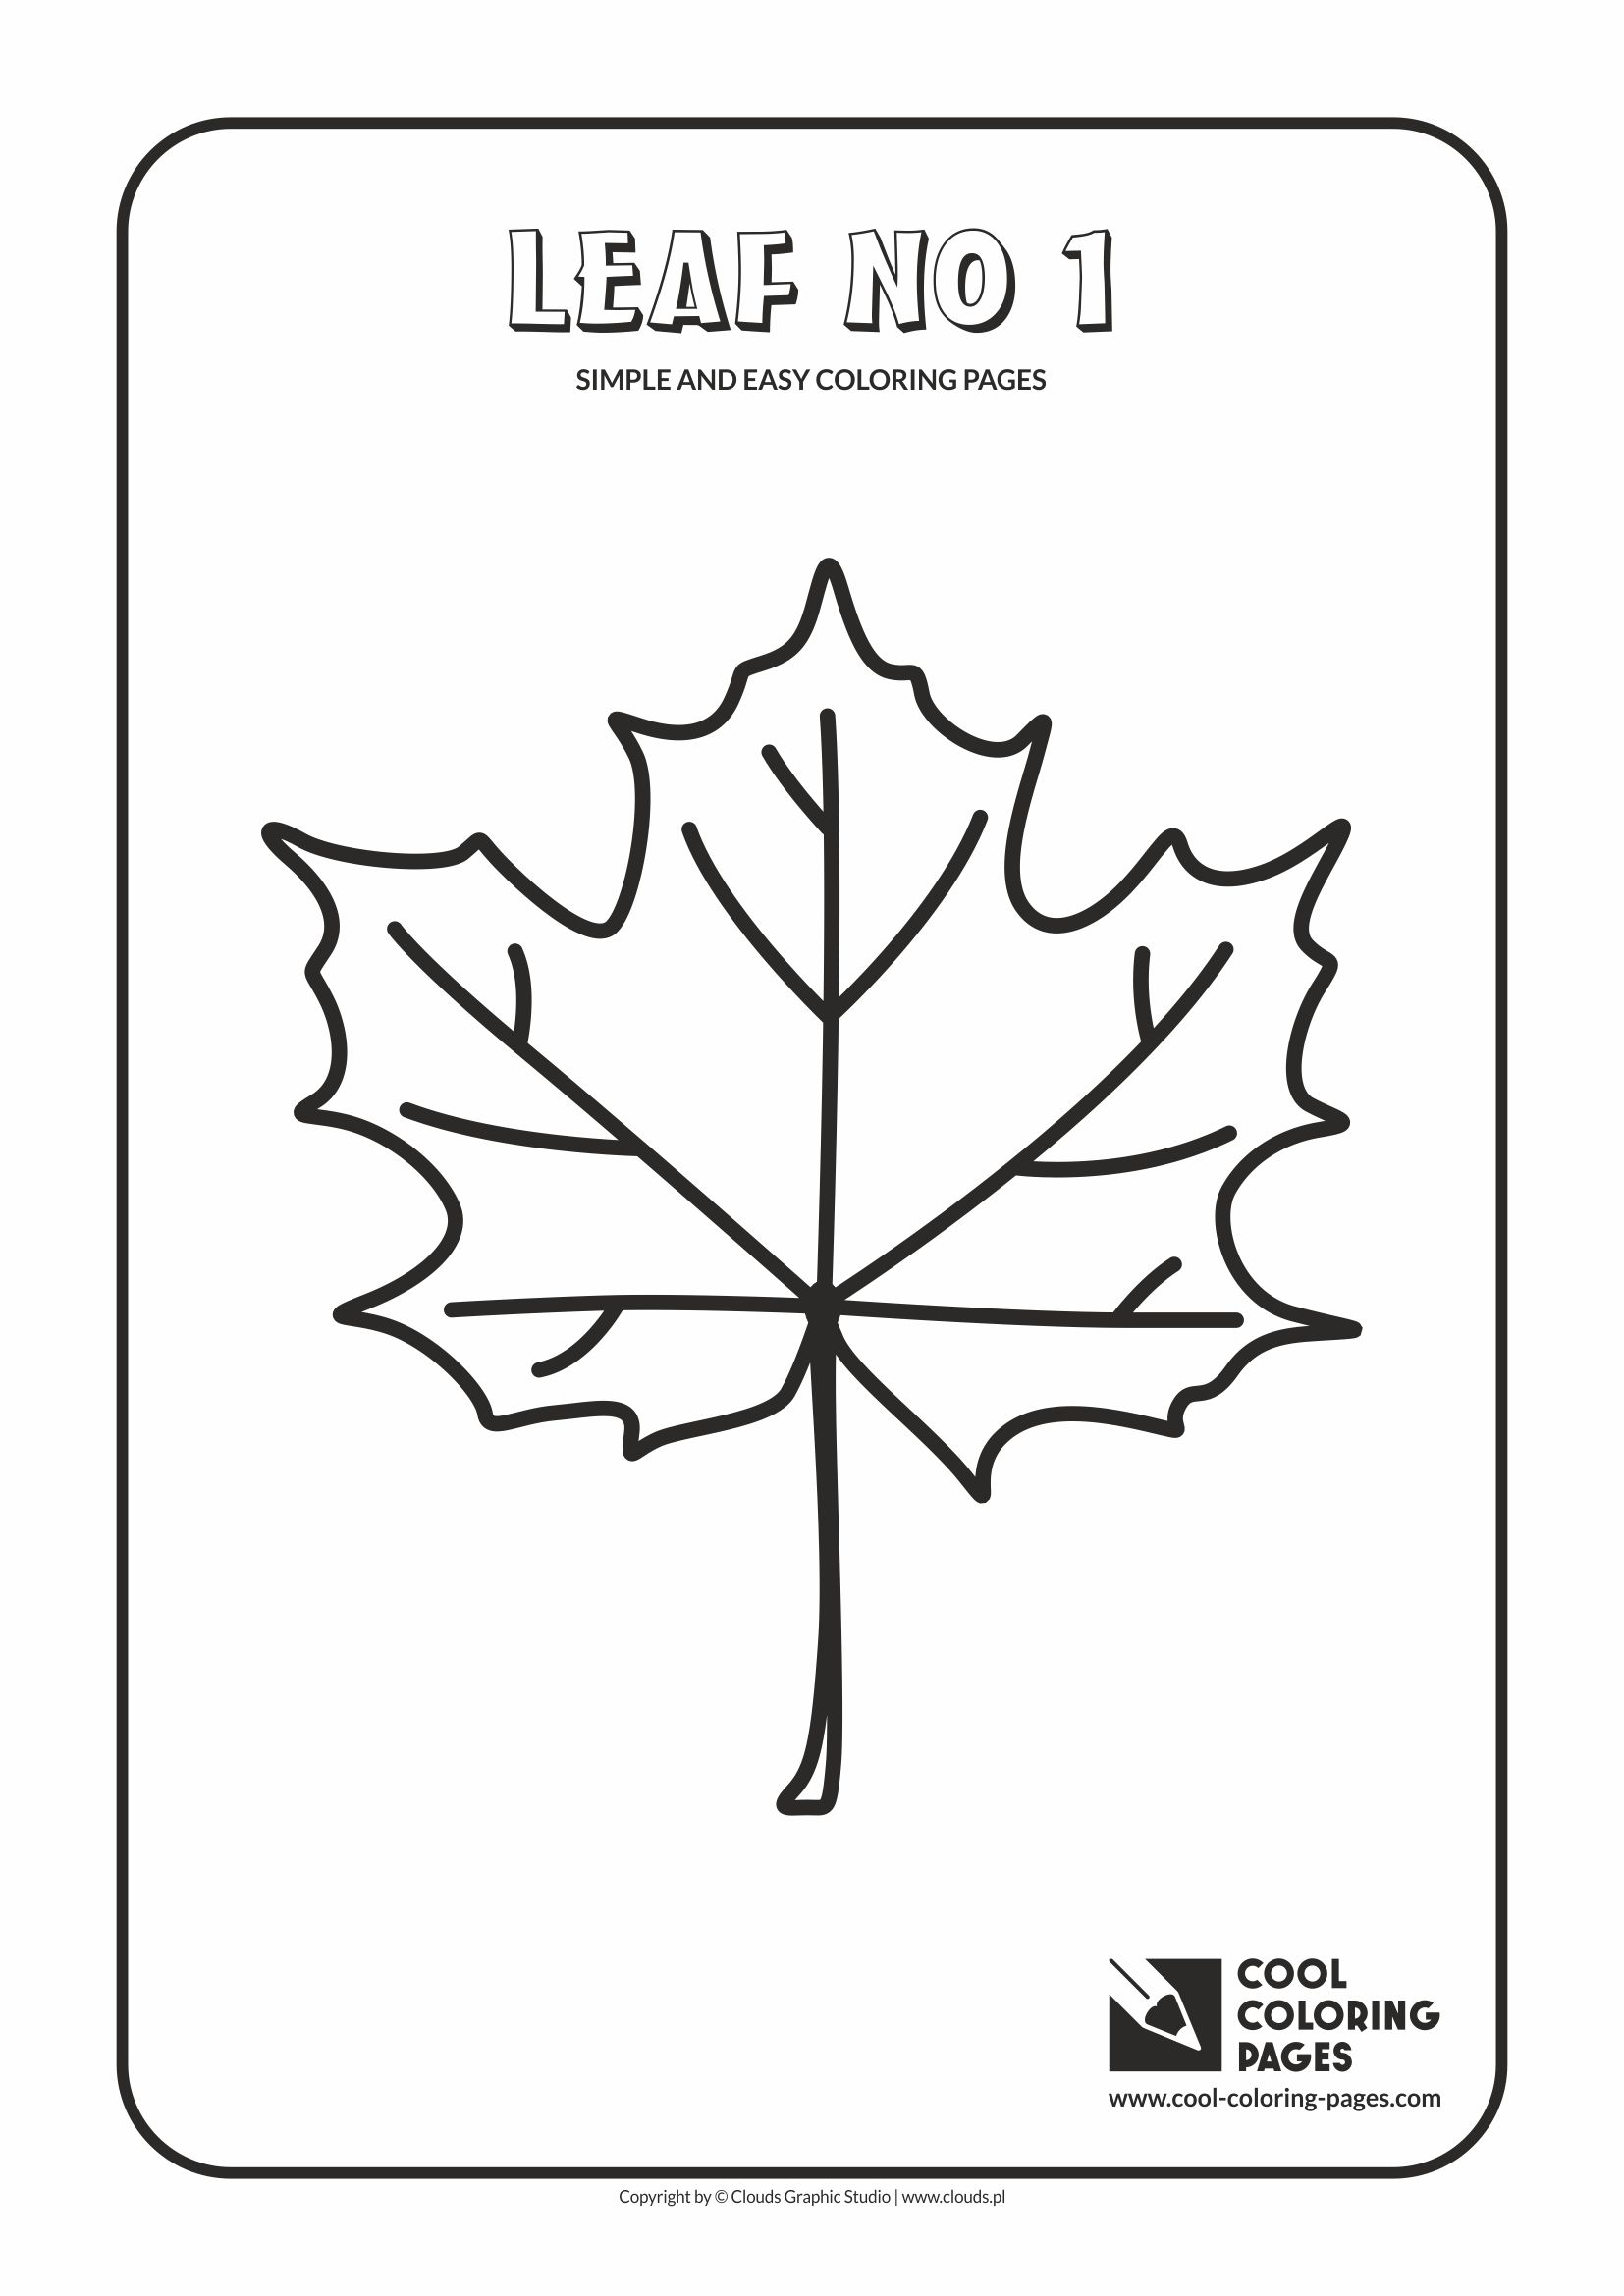 Simple and easy coloring pages for toddlers - Leaf no 1